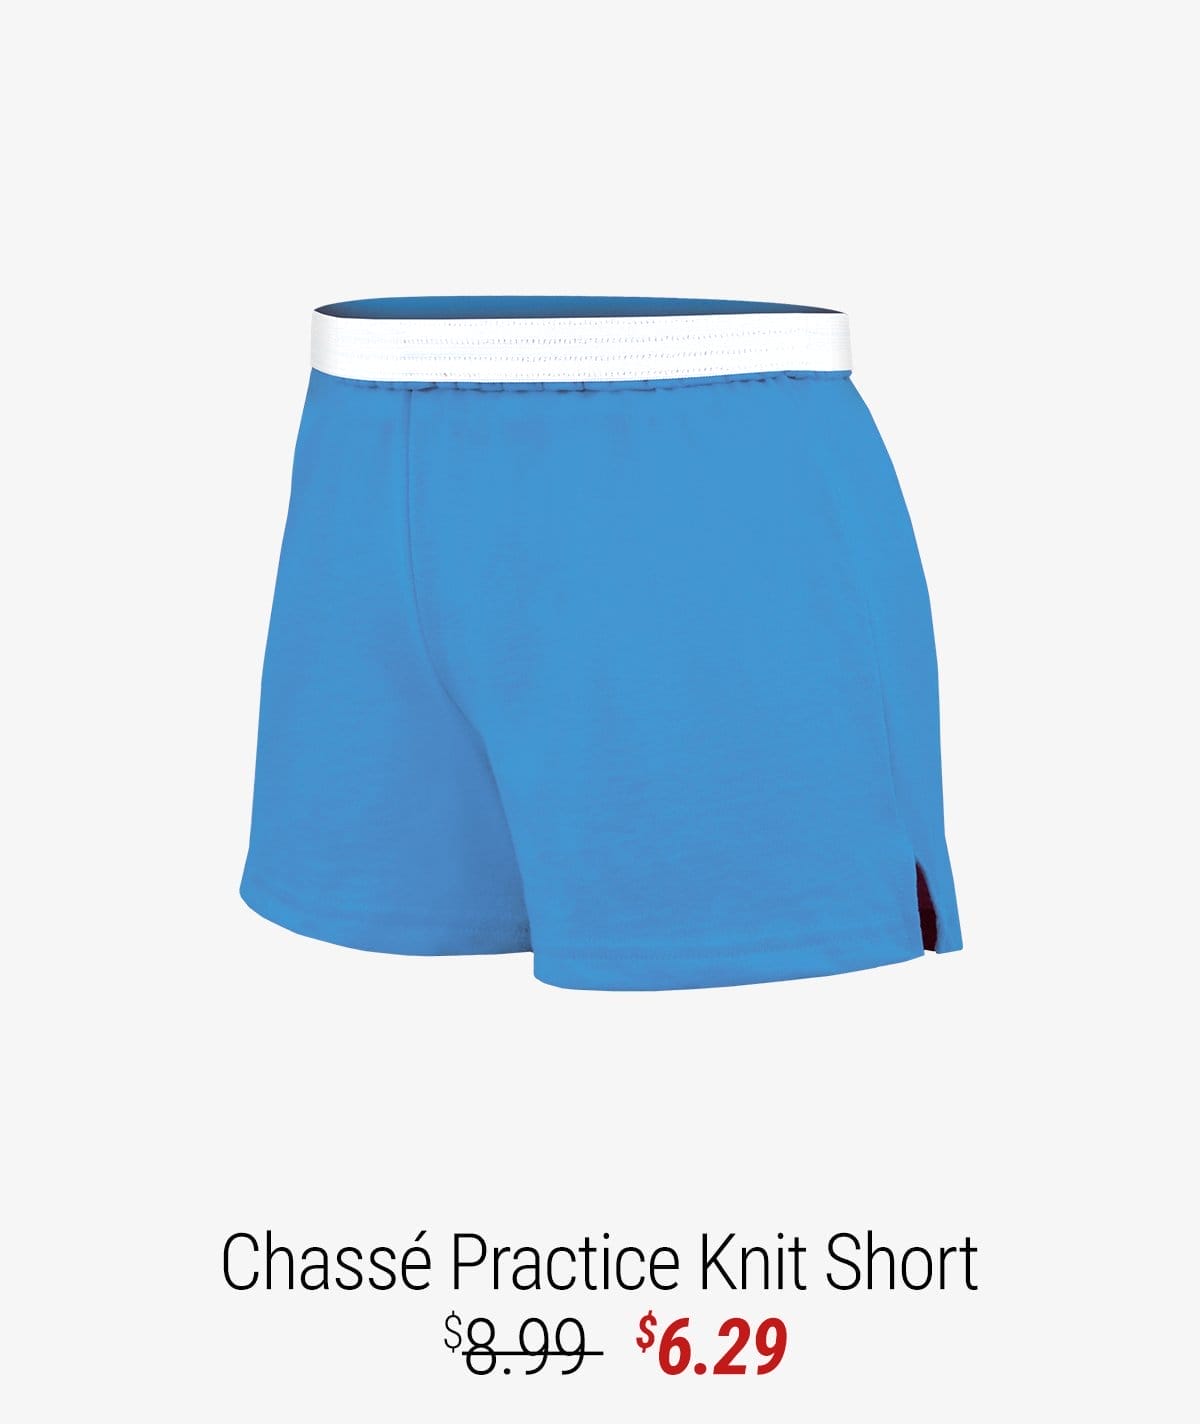 CHASSE PRACTICE KNIT SHORTS